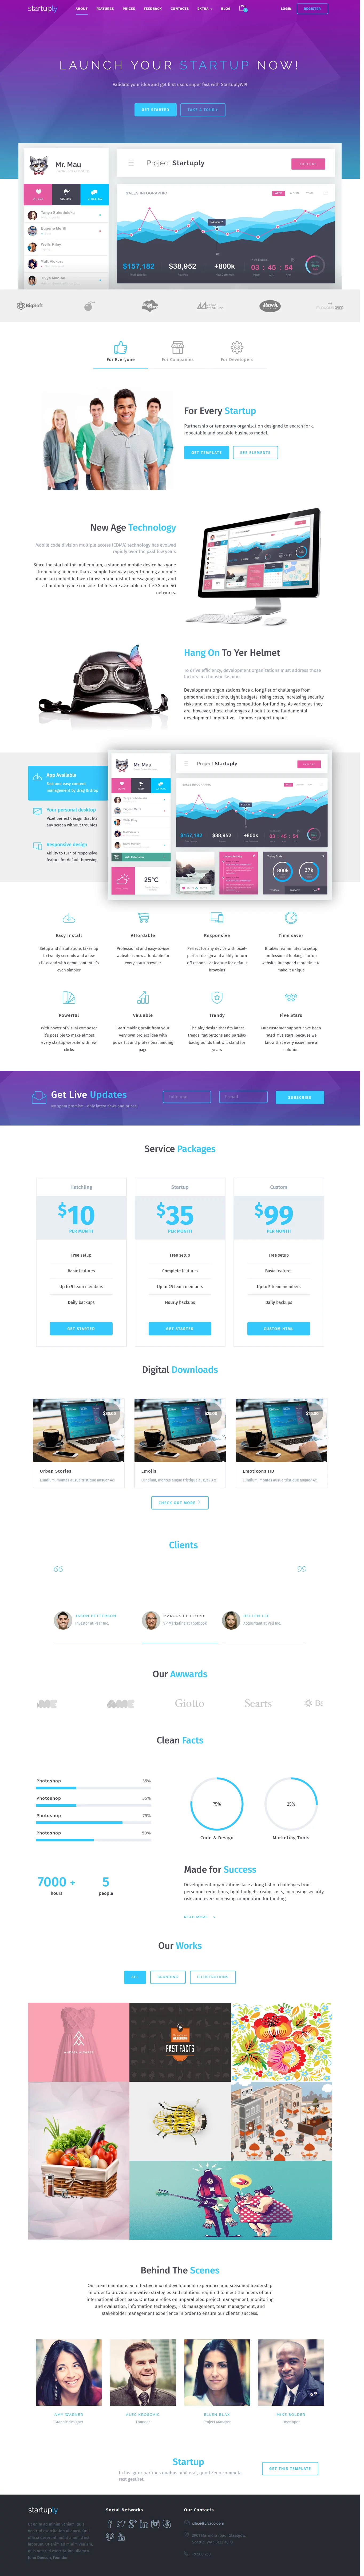 Startuply - Best Premium Coming Soon and Under Construction WordPress Themes and Templates 